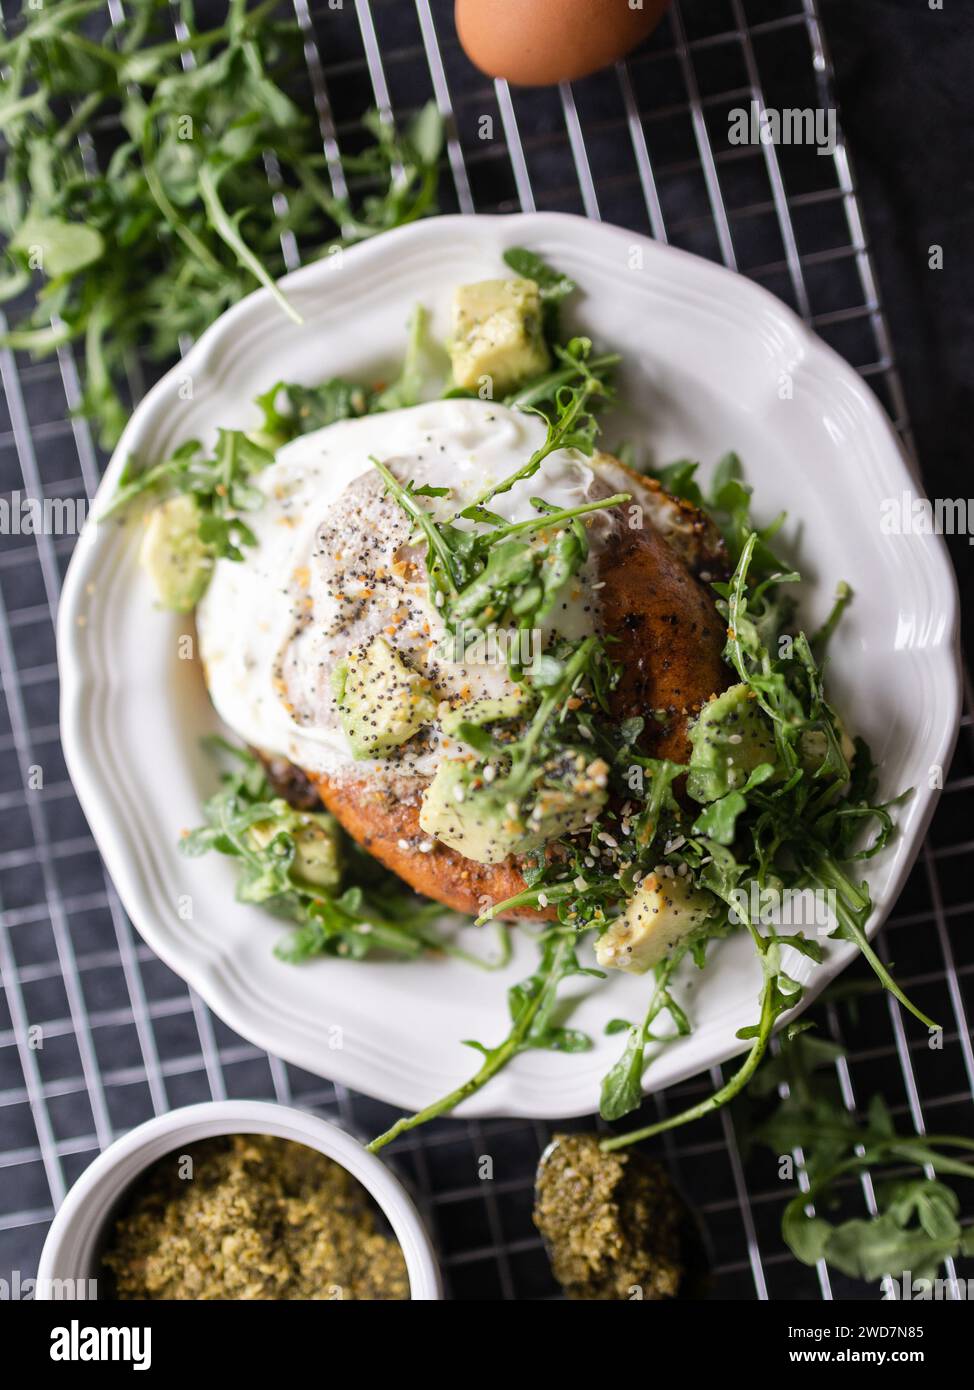 Savory egg and bagel breakfast topped with arugula, pesto, and avocado Stock Photo